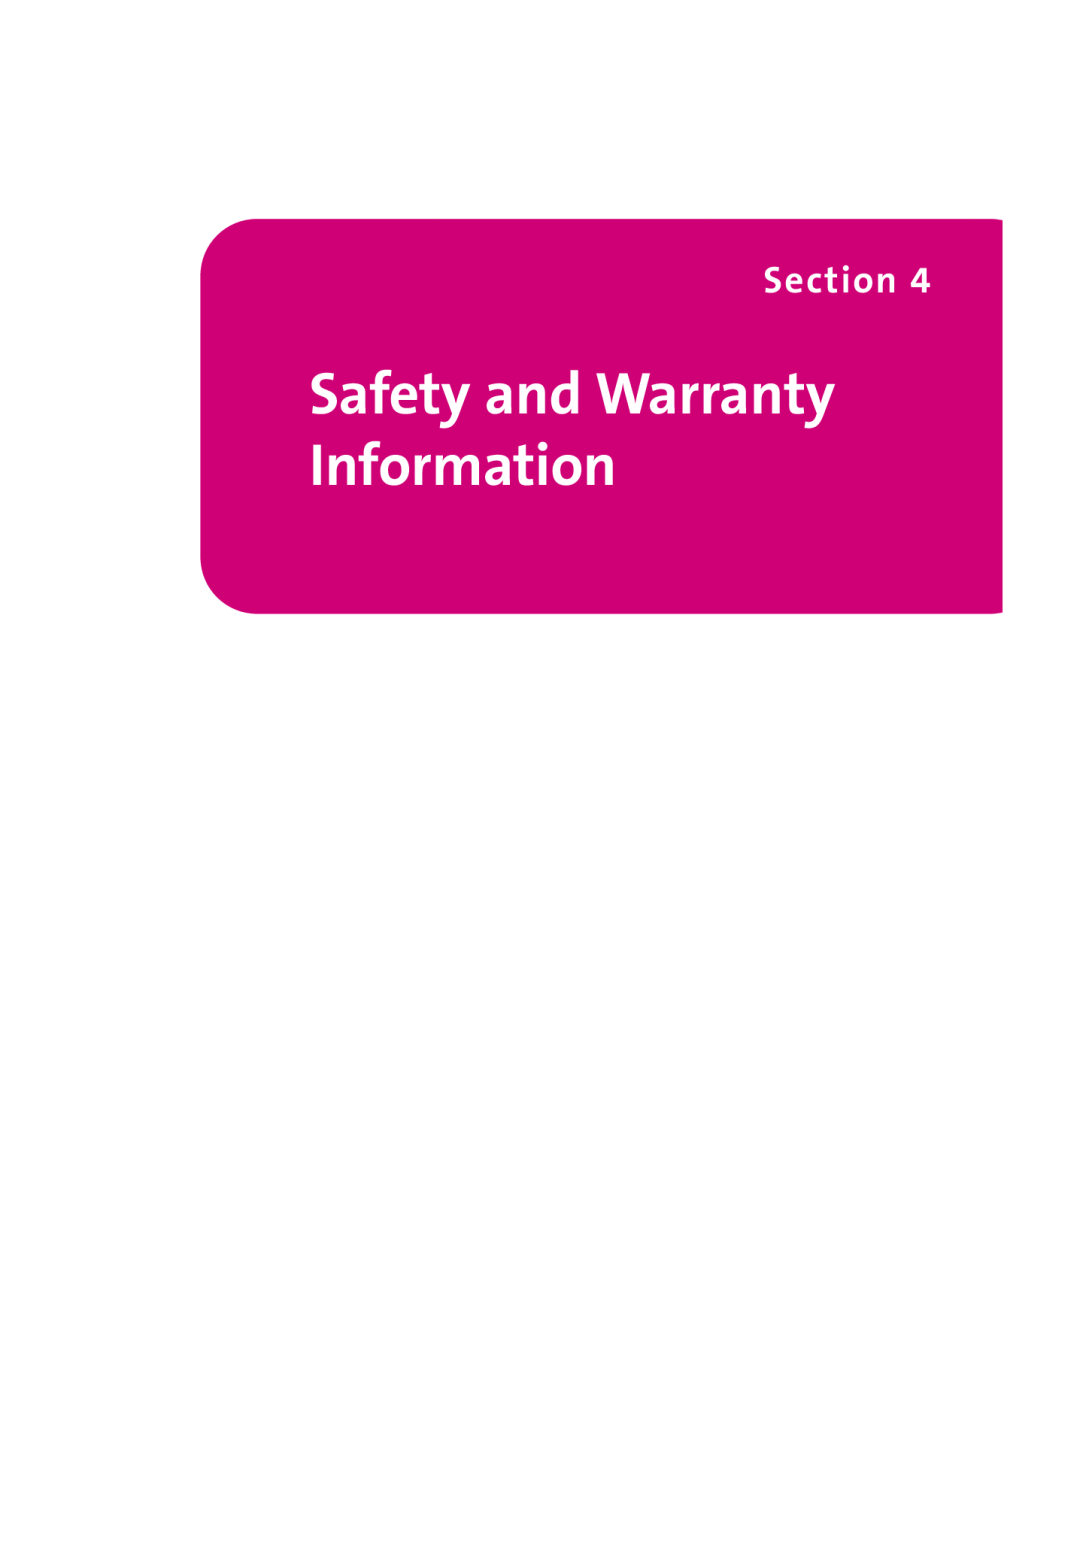 LG Electronics 350 manual Safety and Warranty Information, Section 